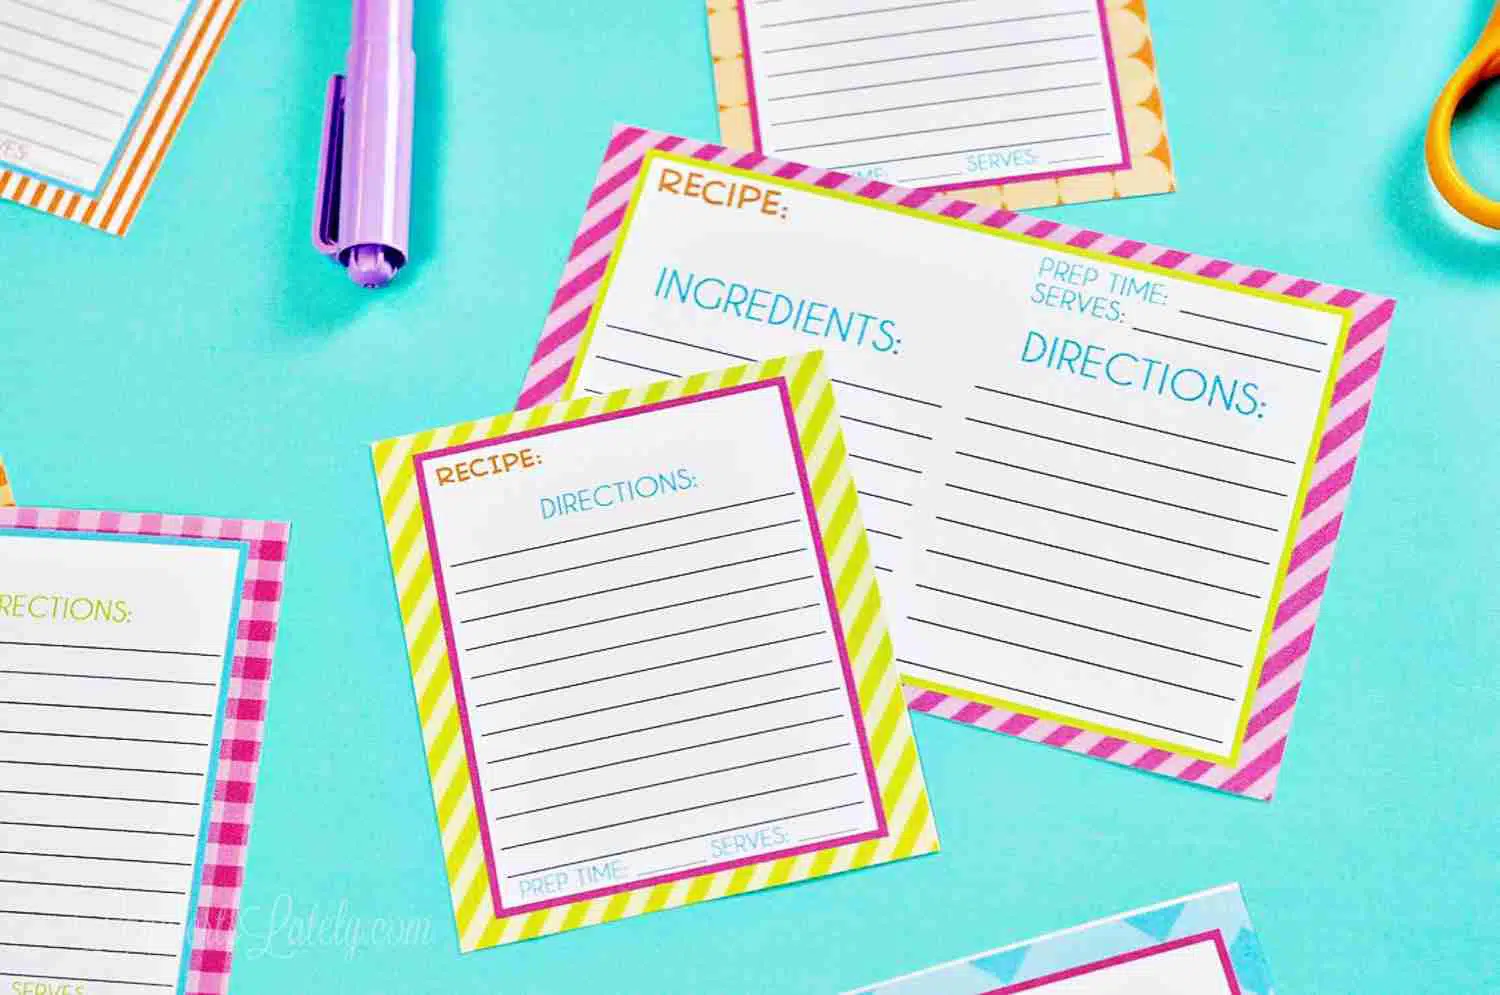 recipe cards and office supplies on a blue background.